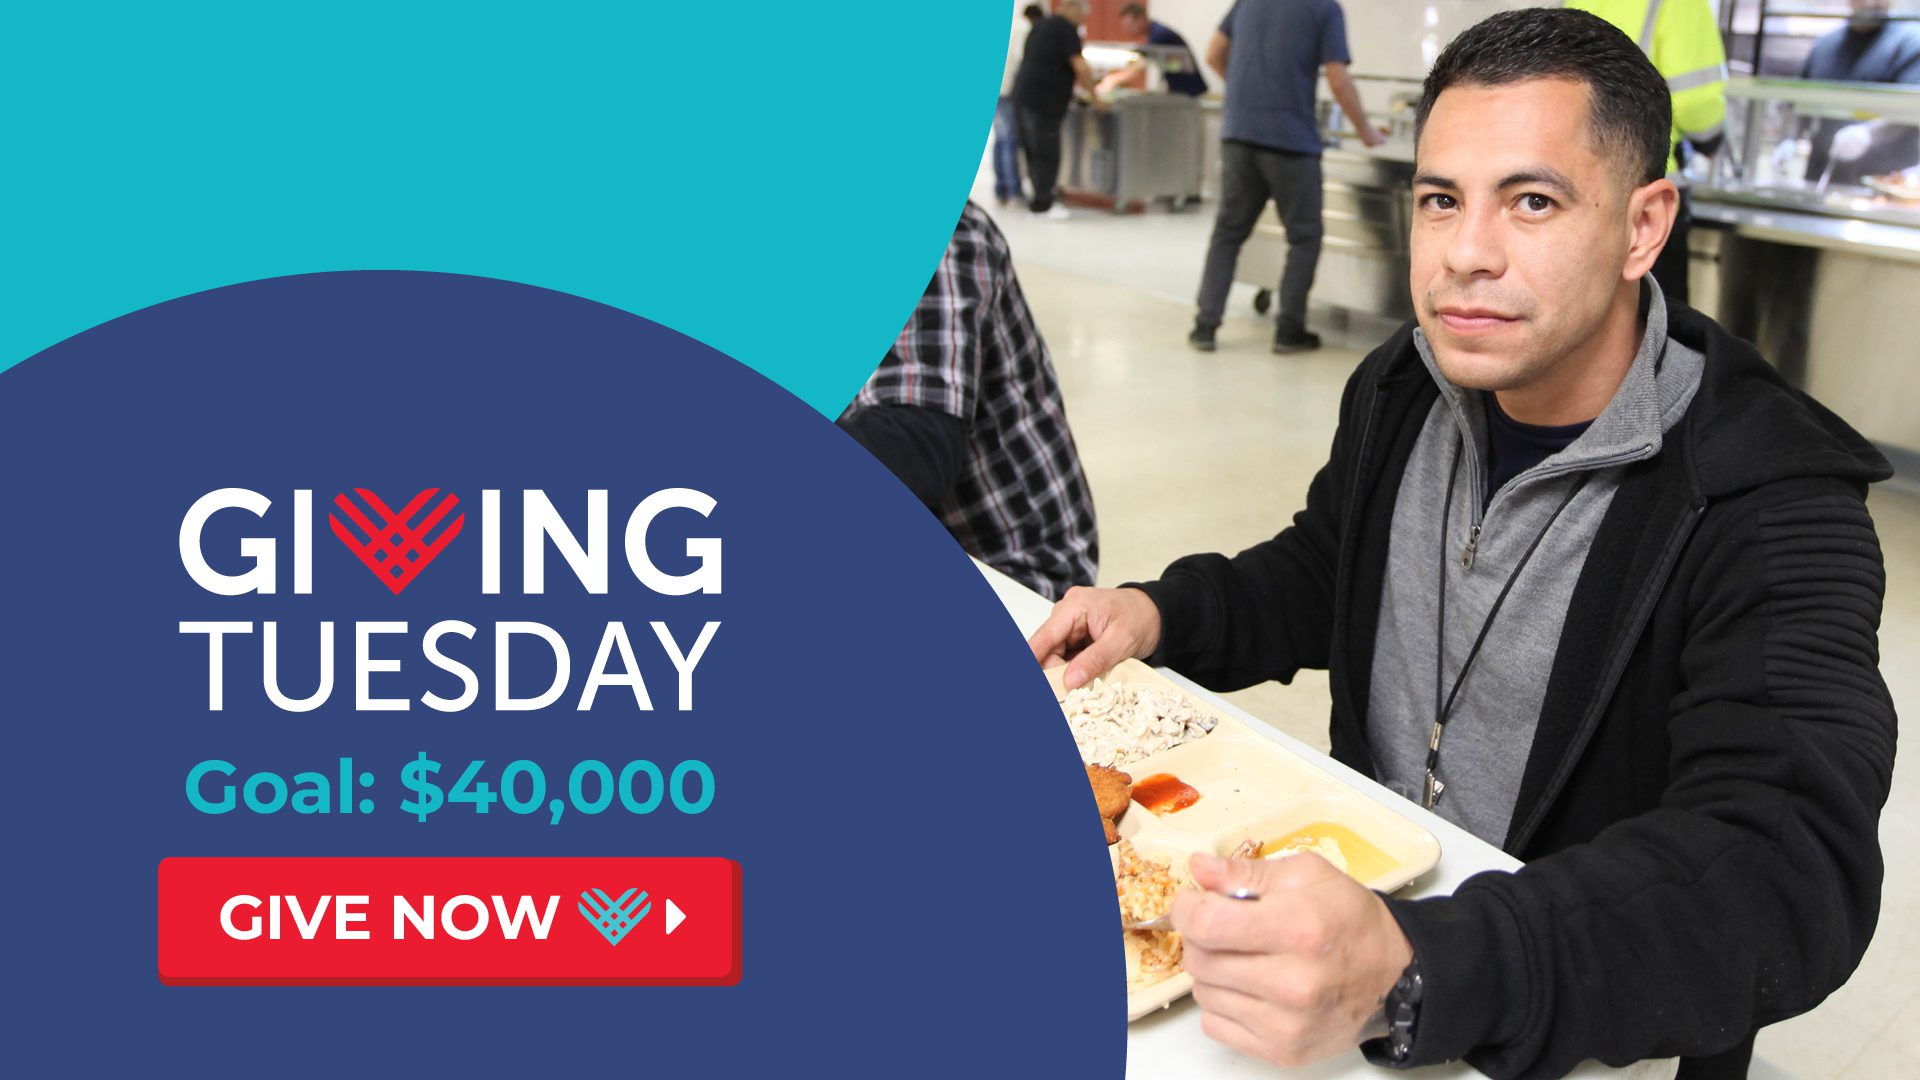 Donate to Fresno Mission on Giving Tuesday